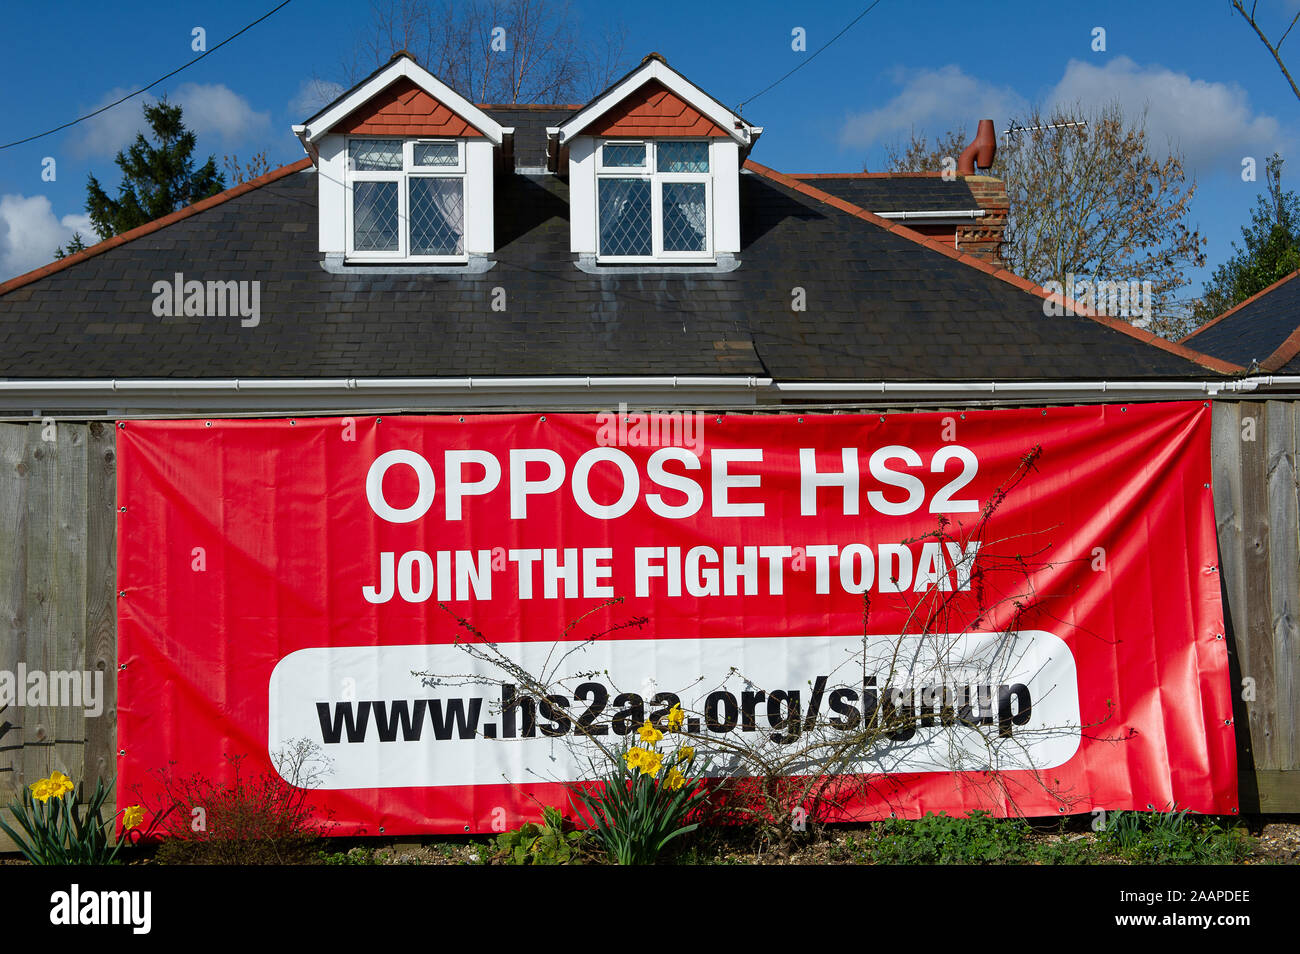 HS2 oppostion sign by A413 road near Little Missenden, Buckinghamshire, UK. 21st March, 2014. A number of large HS2 opposition signs have been placed in fields and outside homes in the county of Buckinghamshire. Many local residents are opposed to the planned HS2 High Speed Rail link from London to Birmingham as it expected to result in the destruction of countryside, rural habitats and ancient woodlands. Credit: Maureen McLean/Alamy Stock Photo